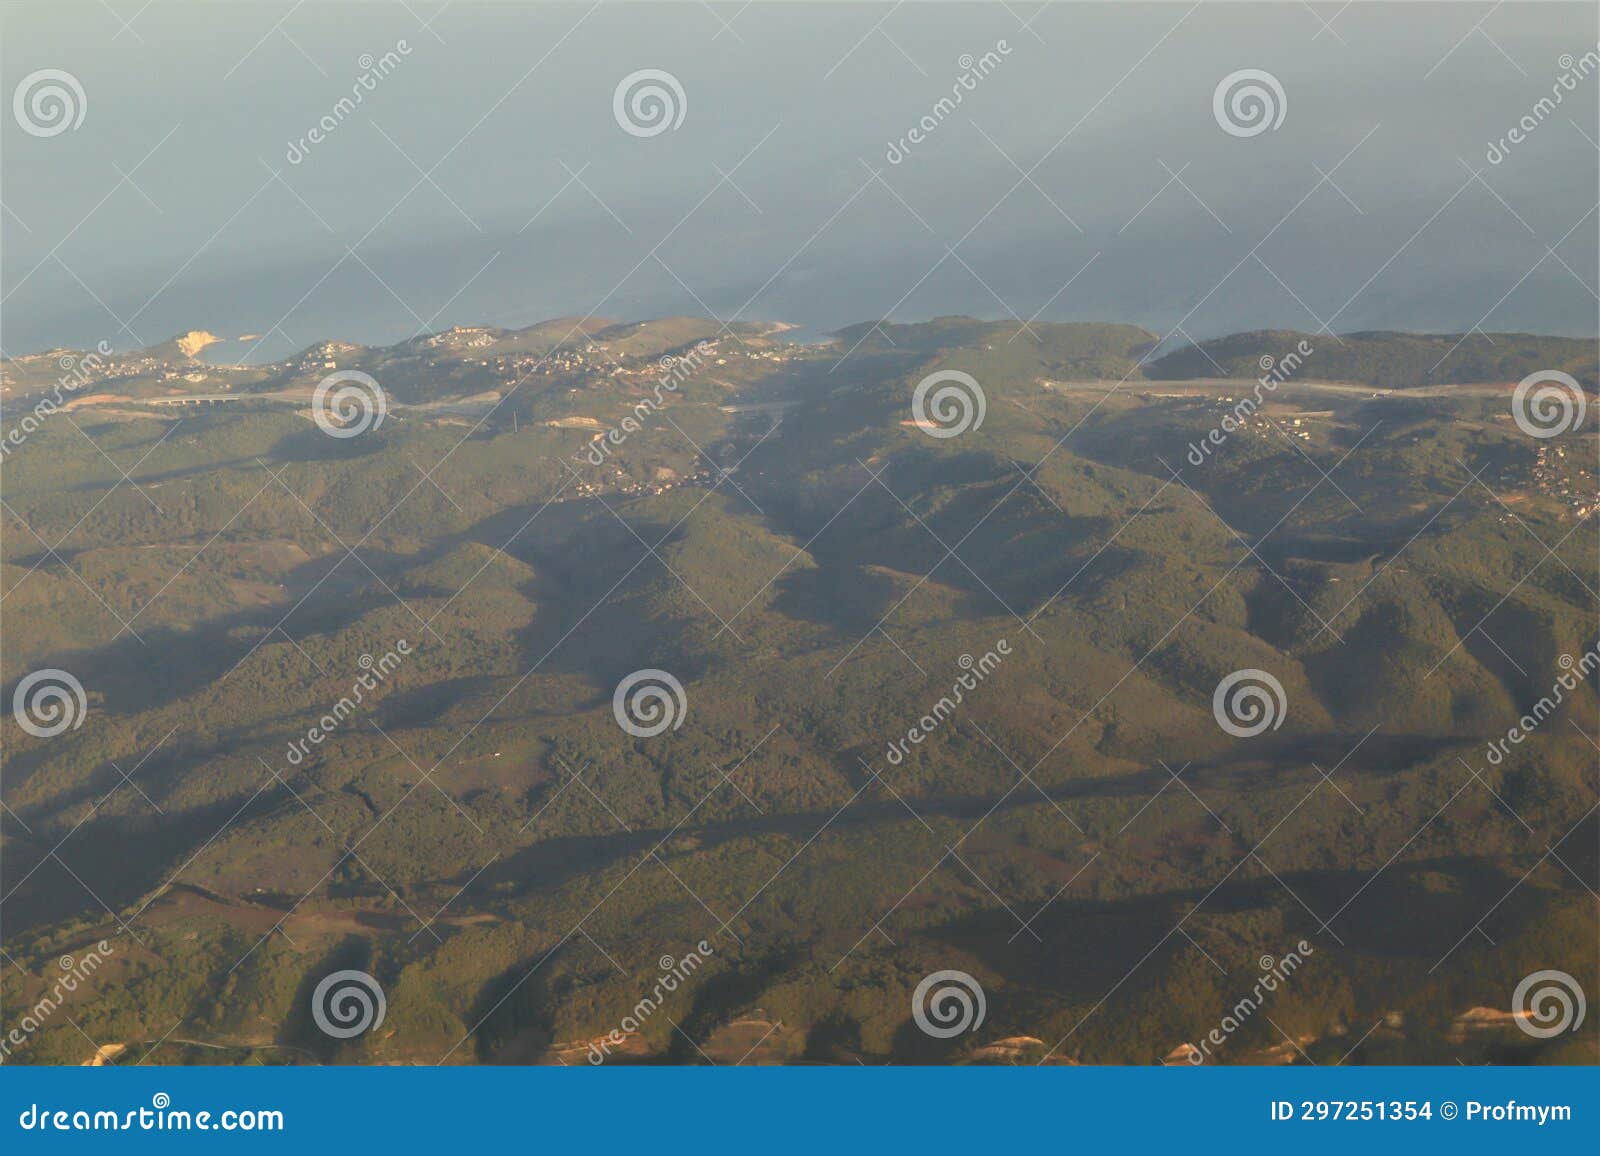 aerial view of forests and mountains along the black sea in istanbul, turkey